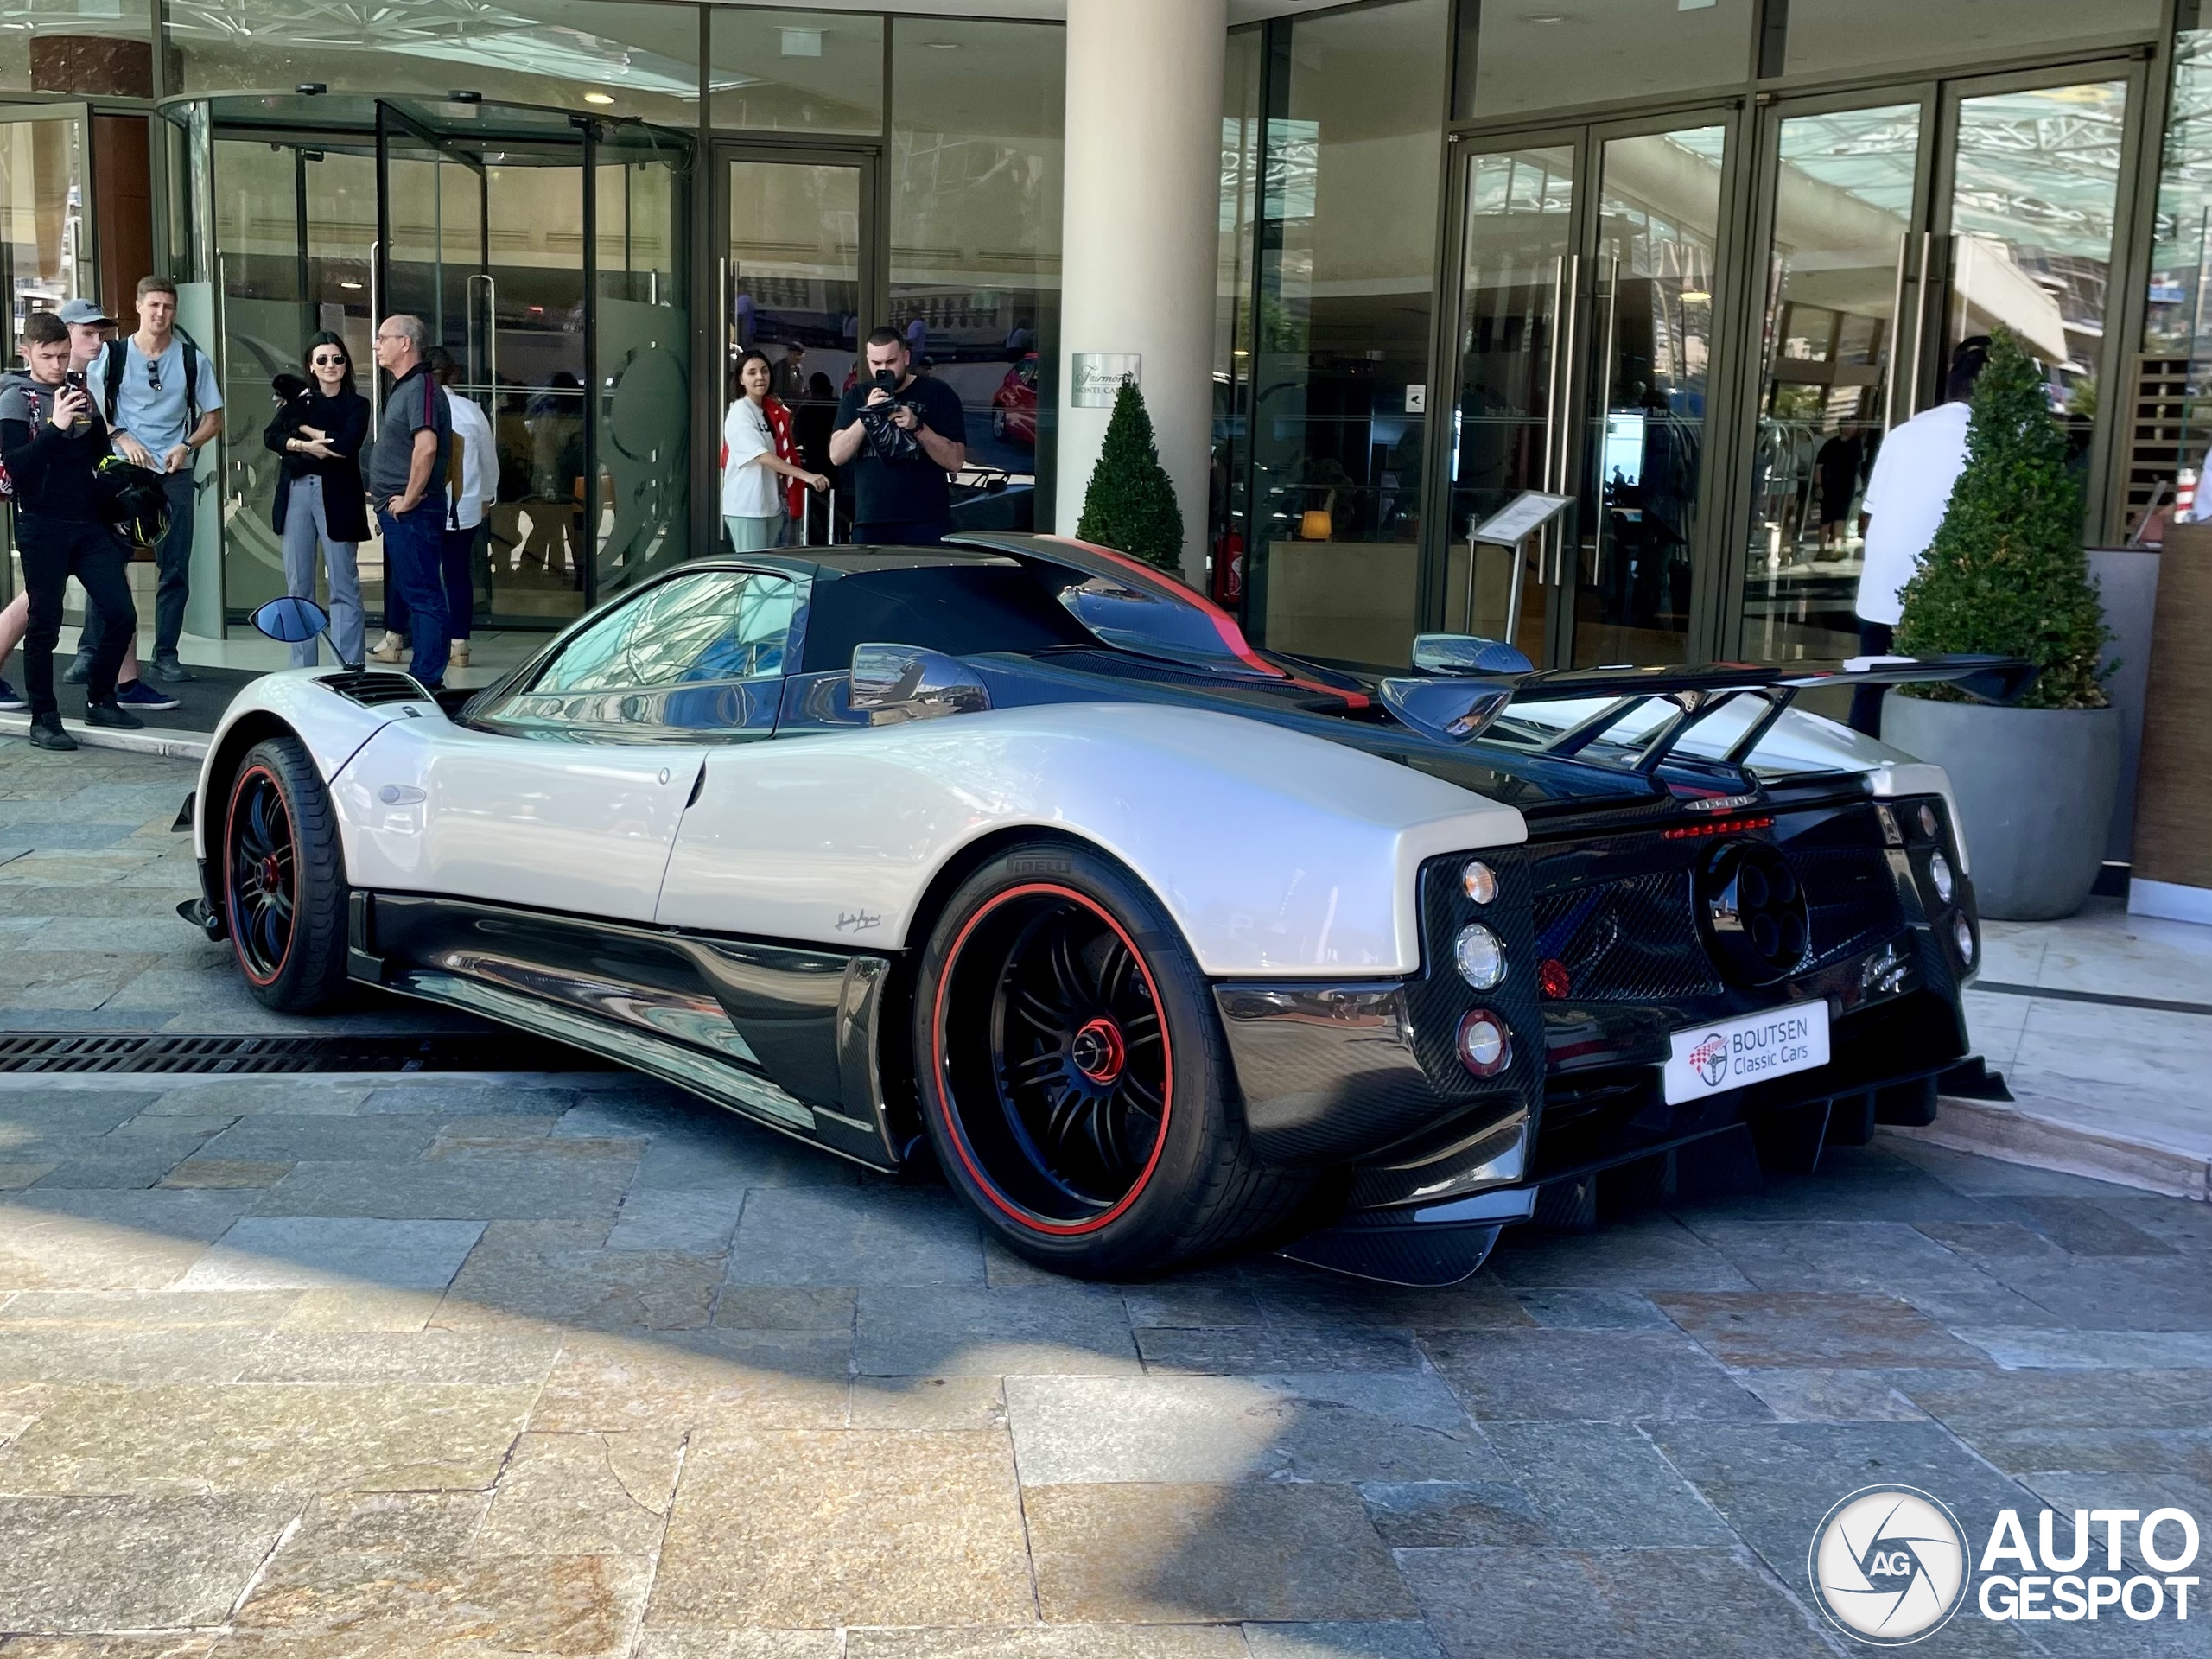 After a long time, finally another Zonda Cinque